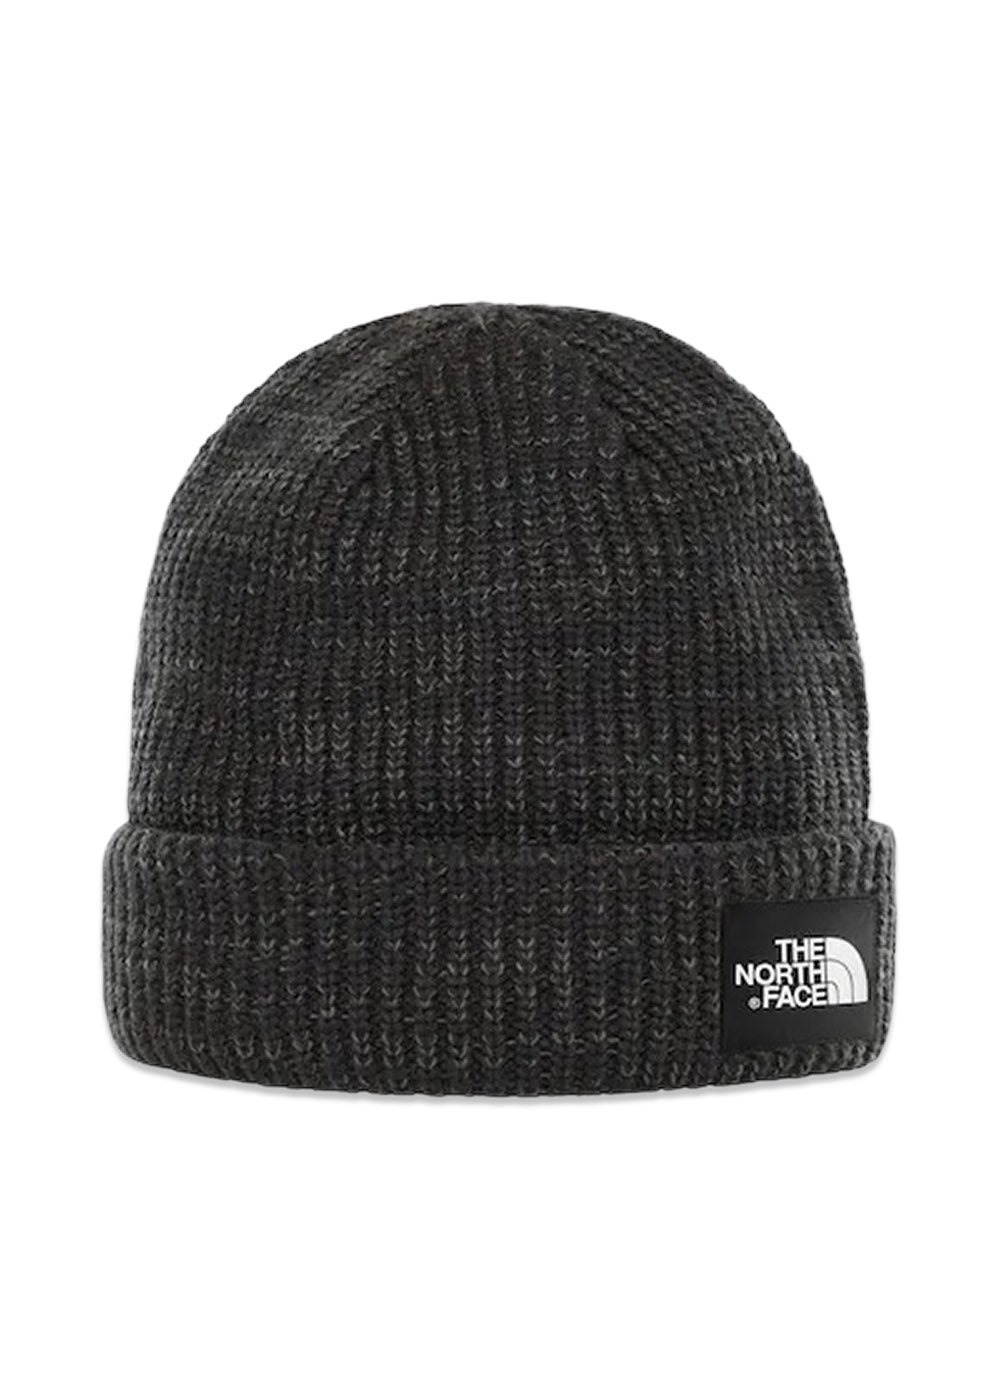 The North Faces Salty Dog Beanie - Tnf Black. Køb huer her.